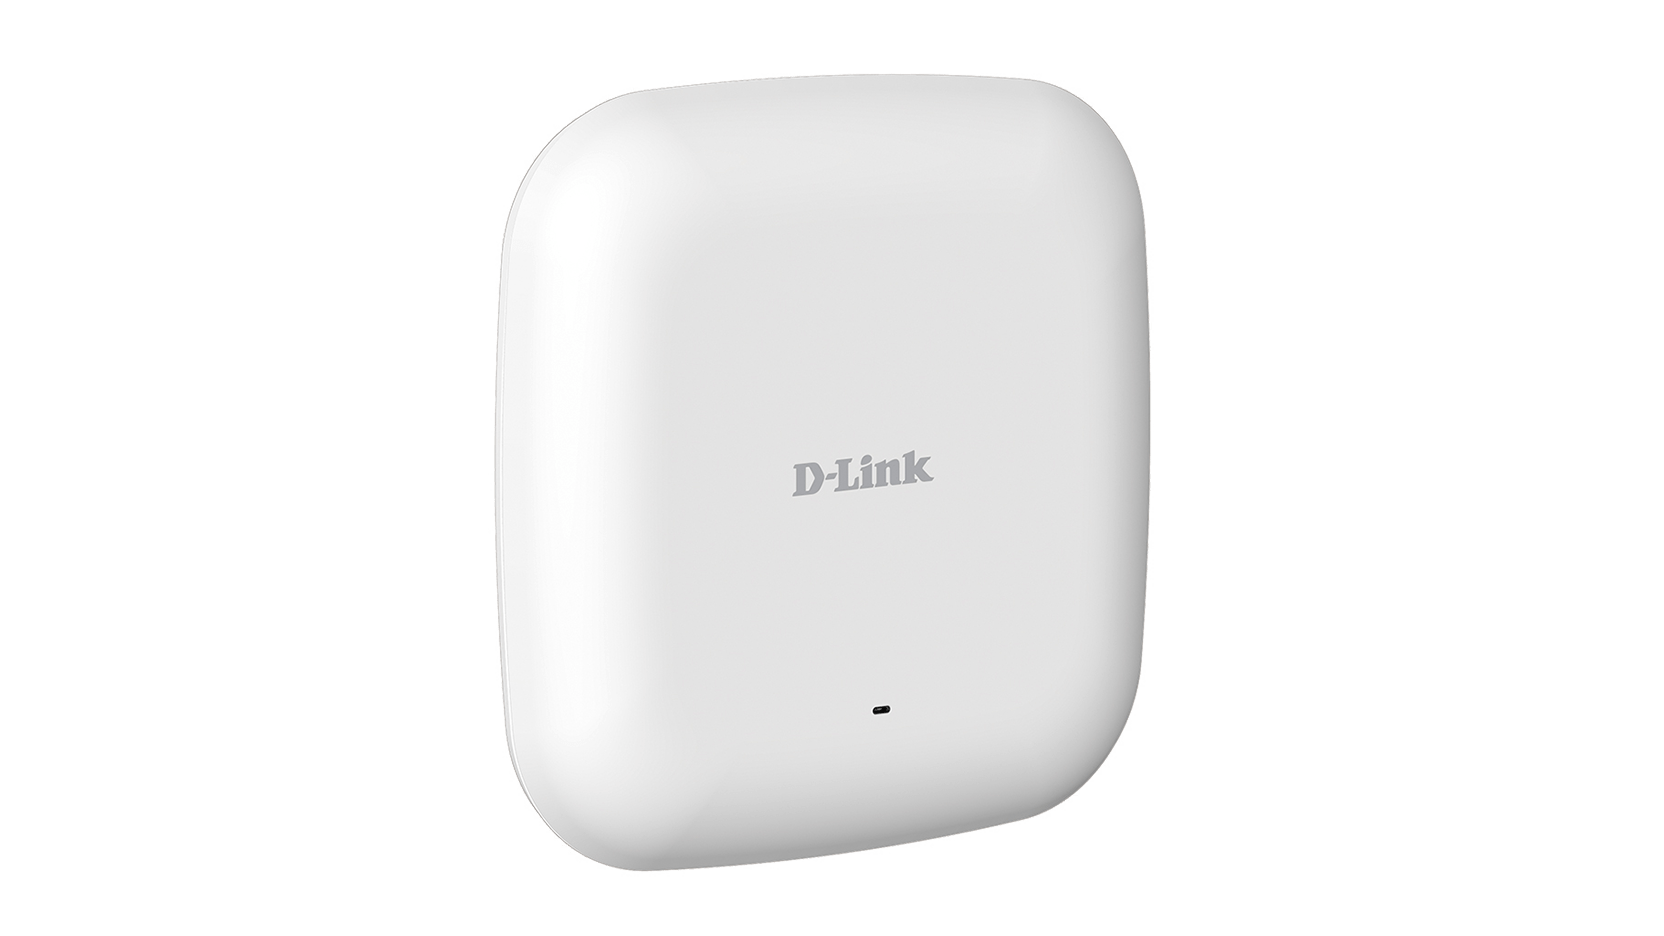 DAP-2610 Wireless AC1300 Wave 2 DualBand PoE Access Point | D-Link